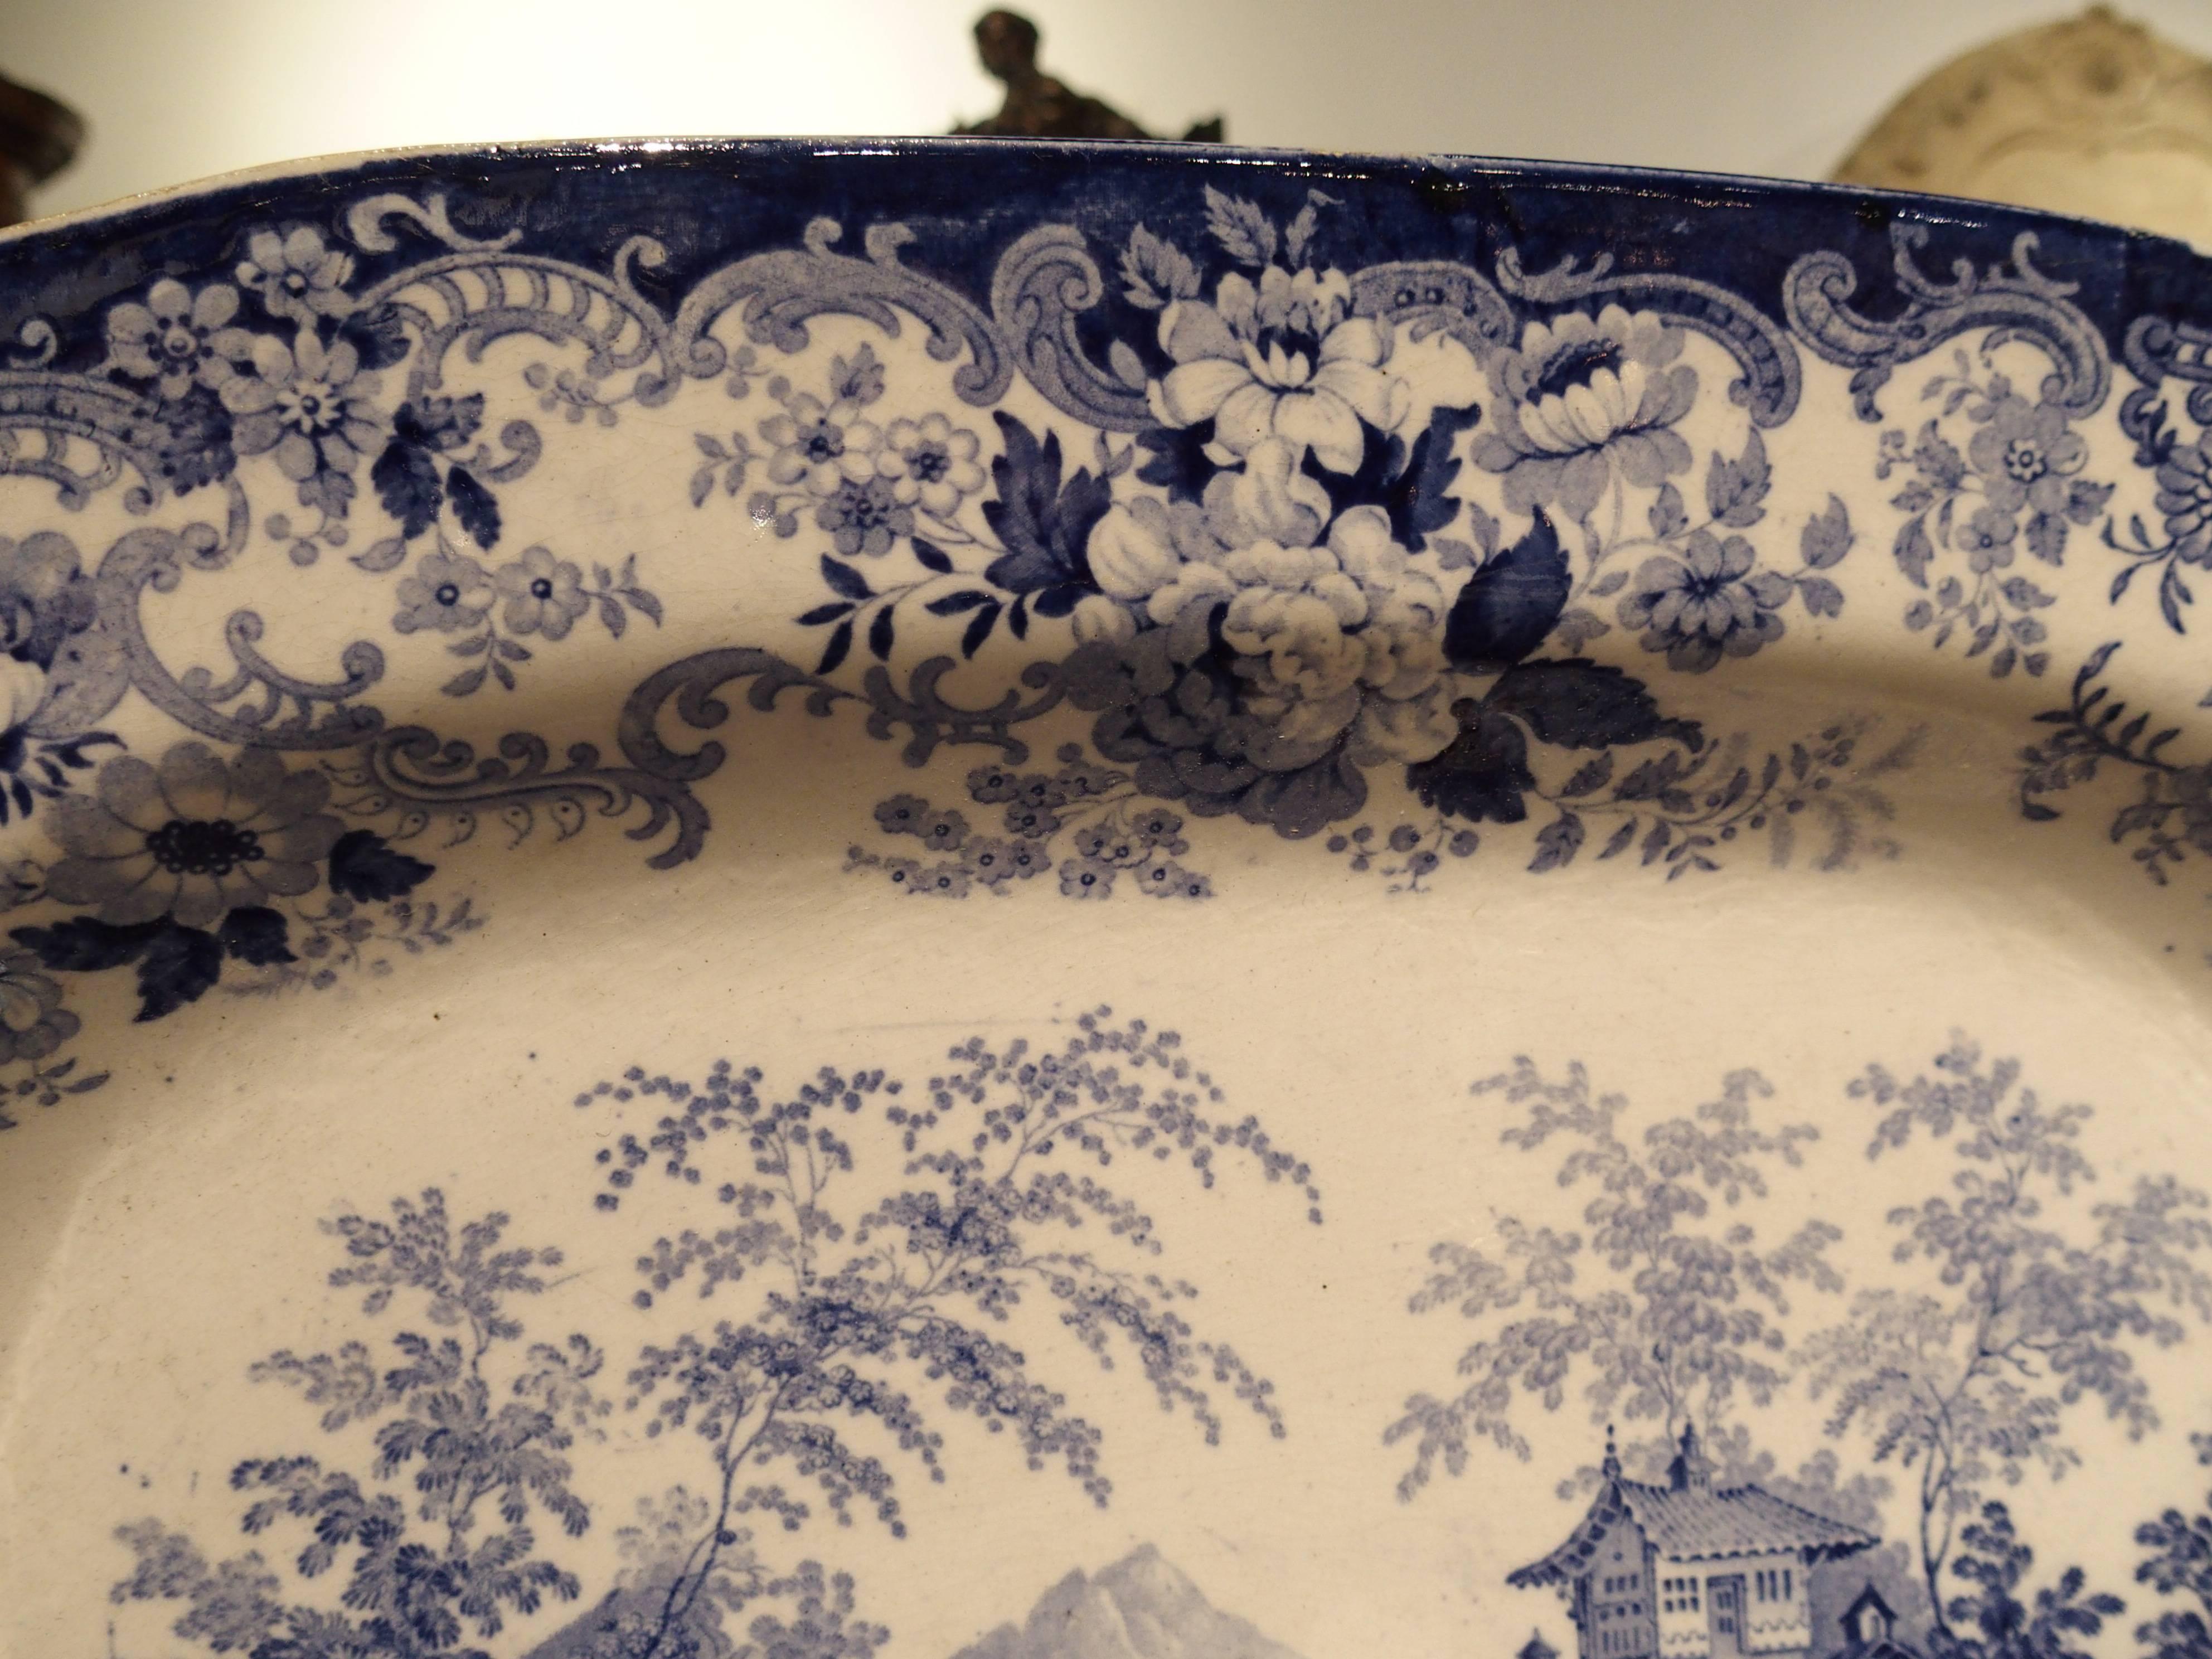 This English blue and white transfer ware platter after Minton’s Genevese pattern, has a charming scene of a lake which is surrounded by homes, mountains and trees, in the chinoiserie style. The border of the platter is a mixture of scrolling floral